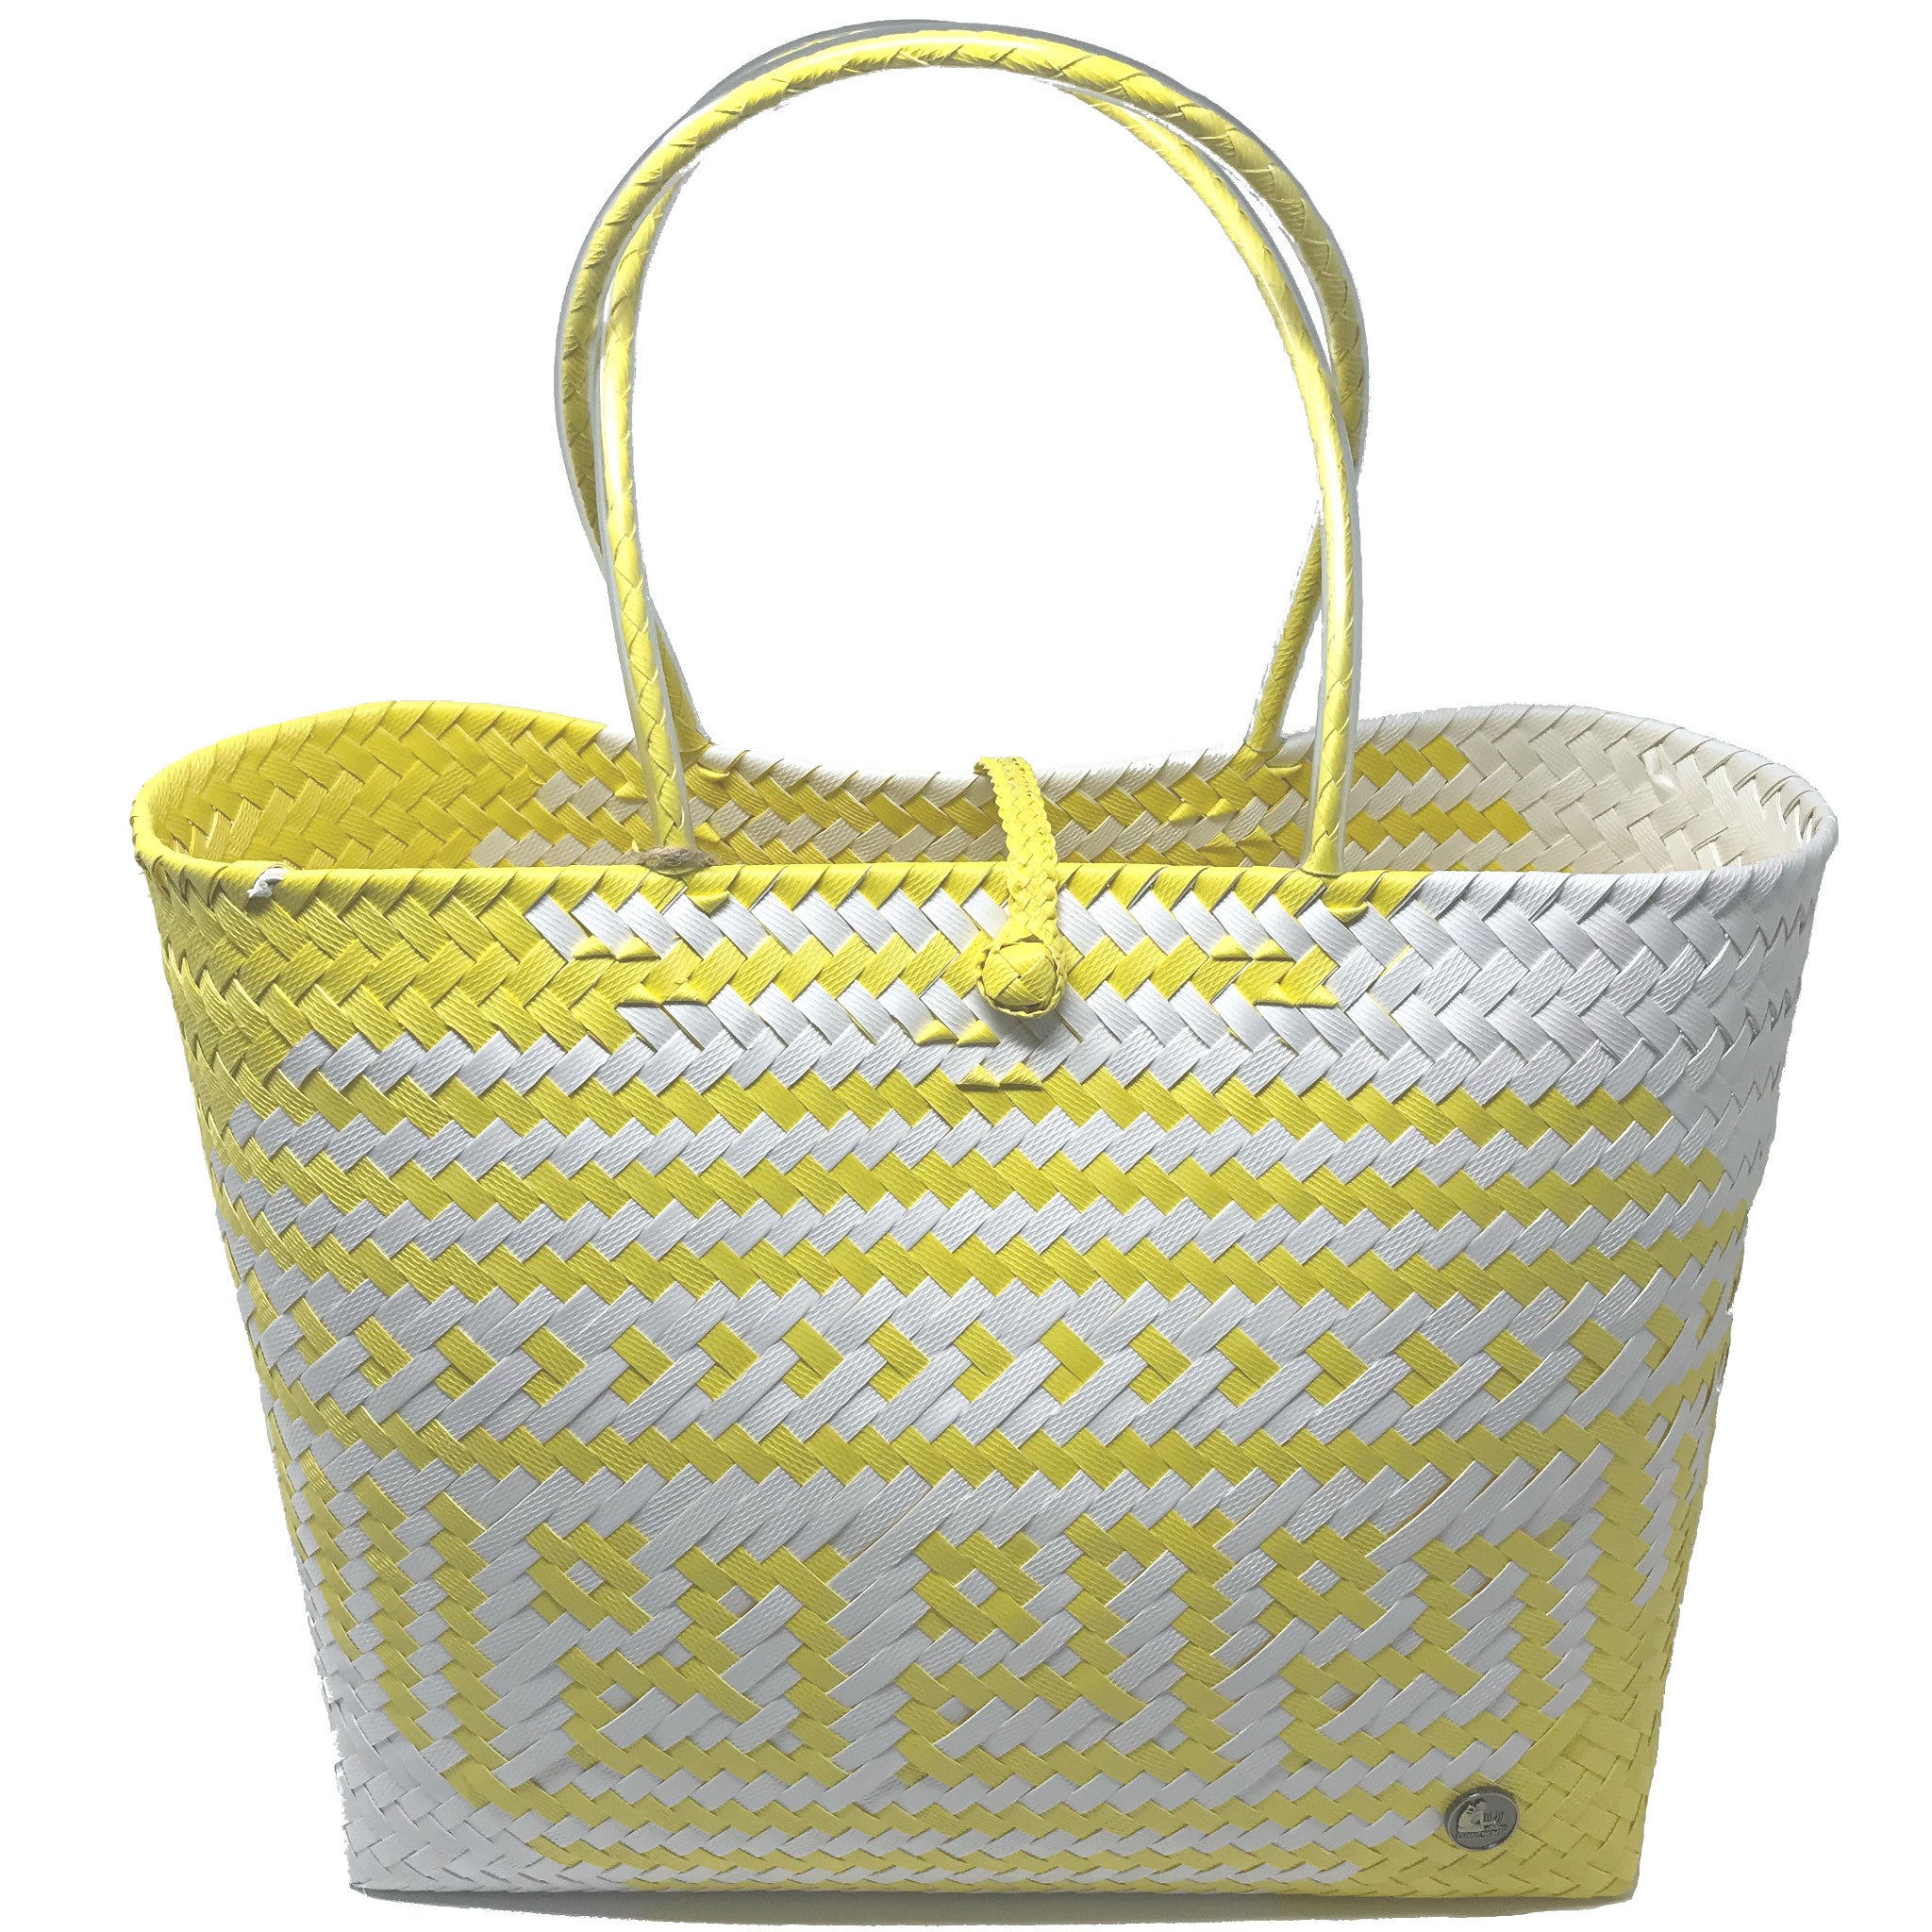 Yellow and white large size tote bag facing the front.